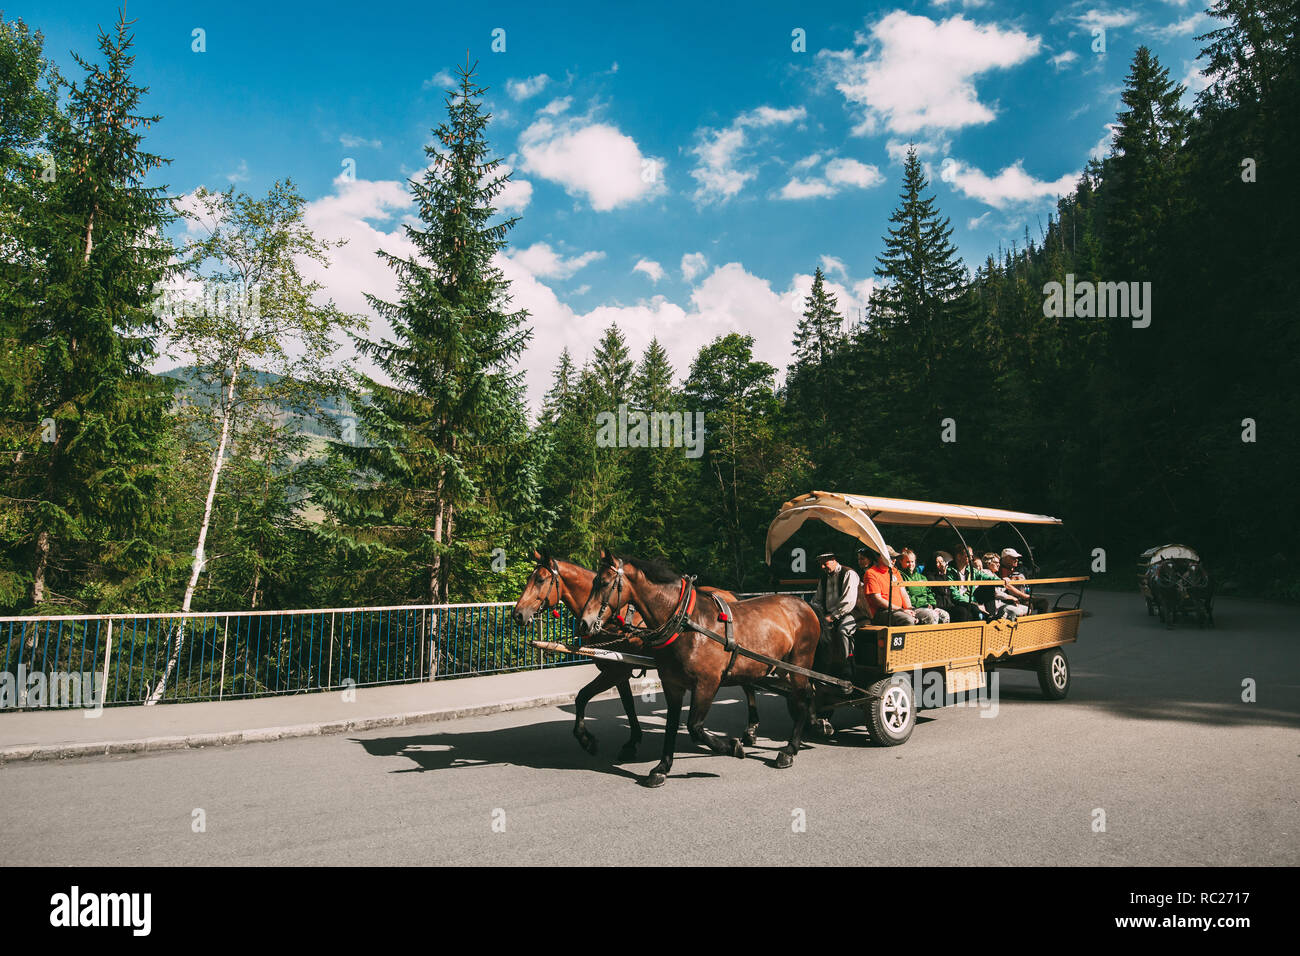 Tatra National Park, Poland - August 29, 2018: Man In National Traditional Polish Folk Ethnic Costumes Ride A Cart Harnessed By A Pair Of Horses Along Stock Photo